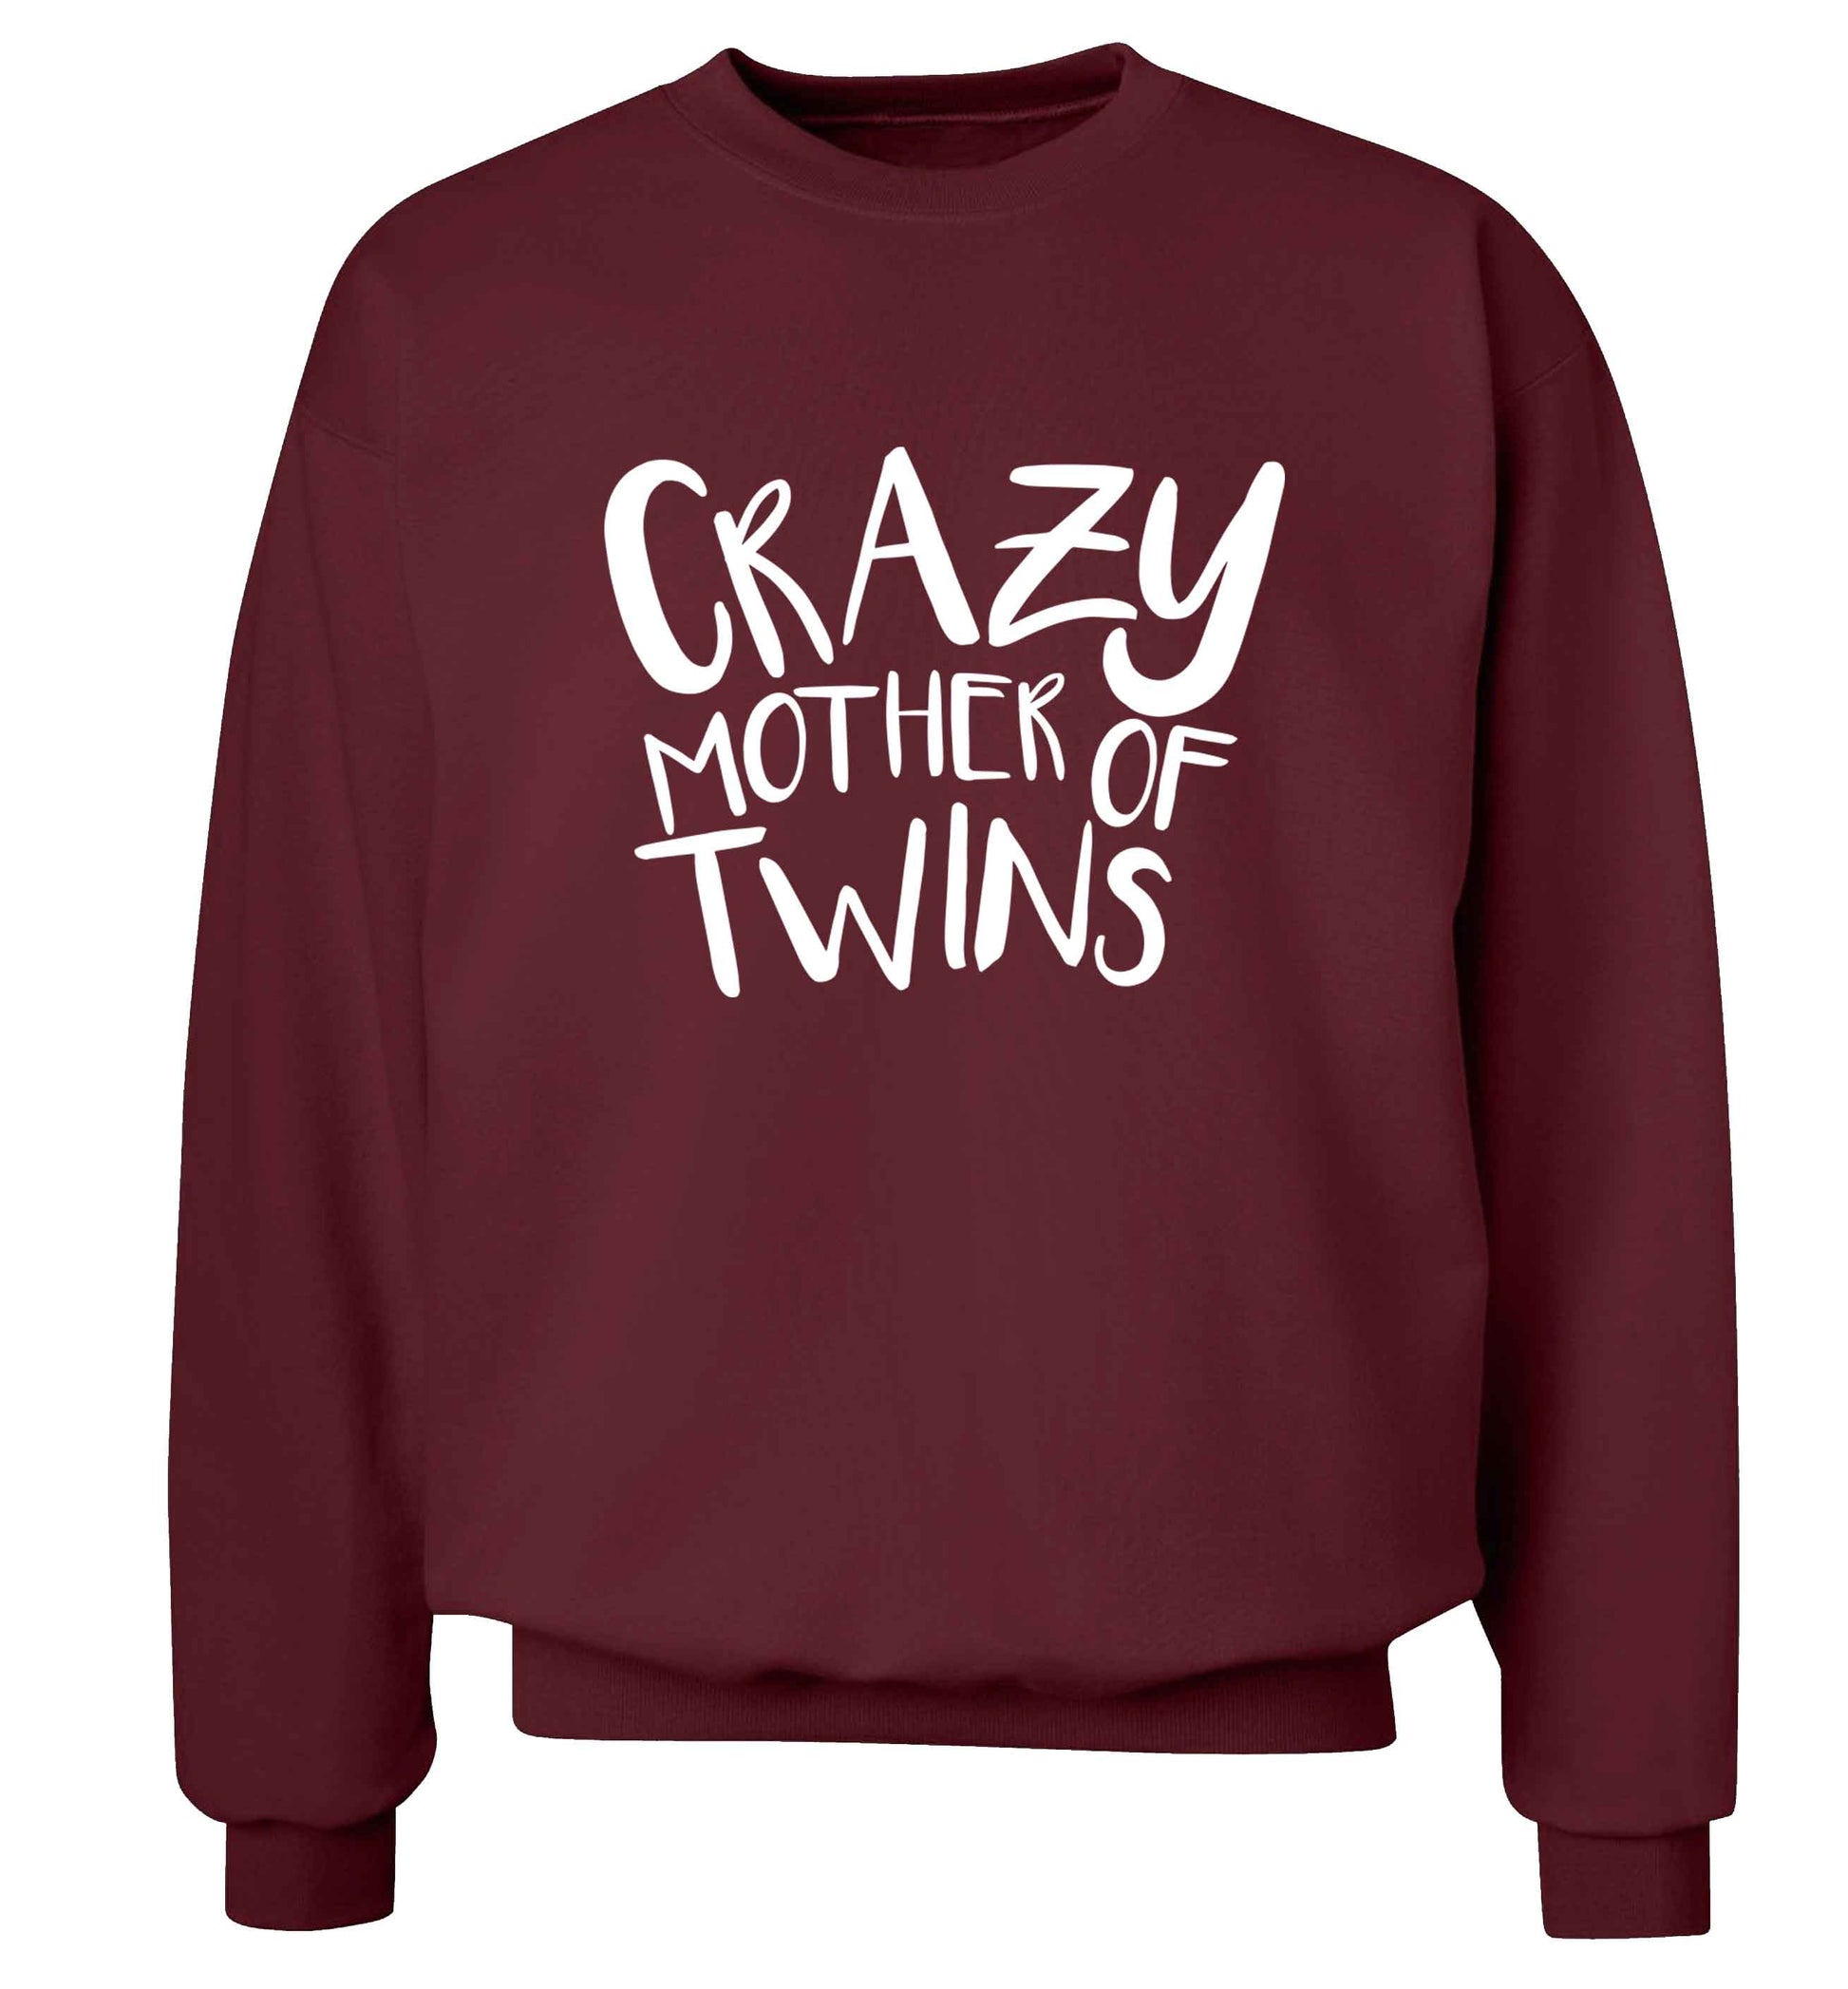 Crazy mother of twins adult's unisex maroon sweater 2XL